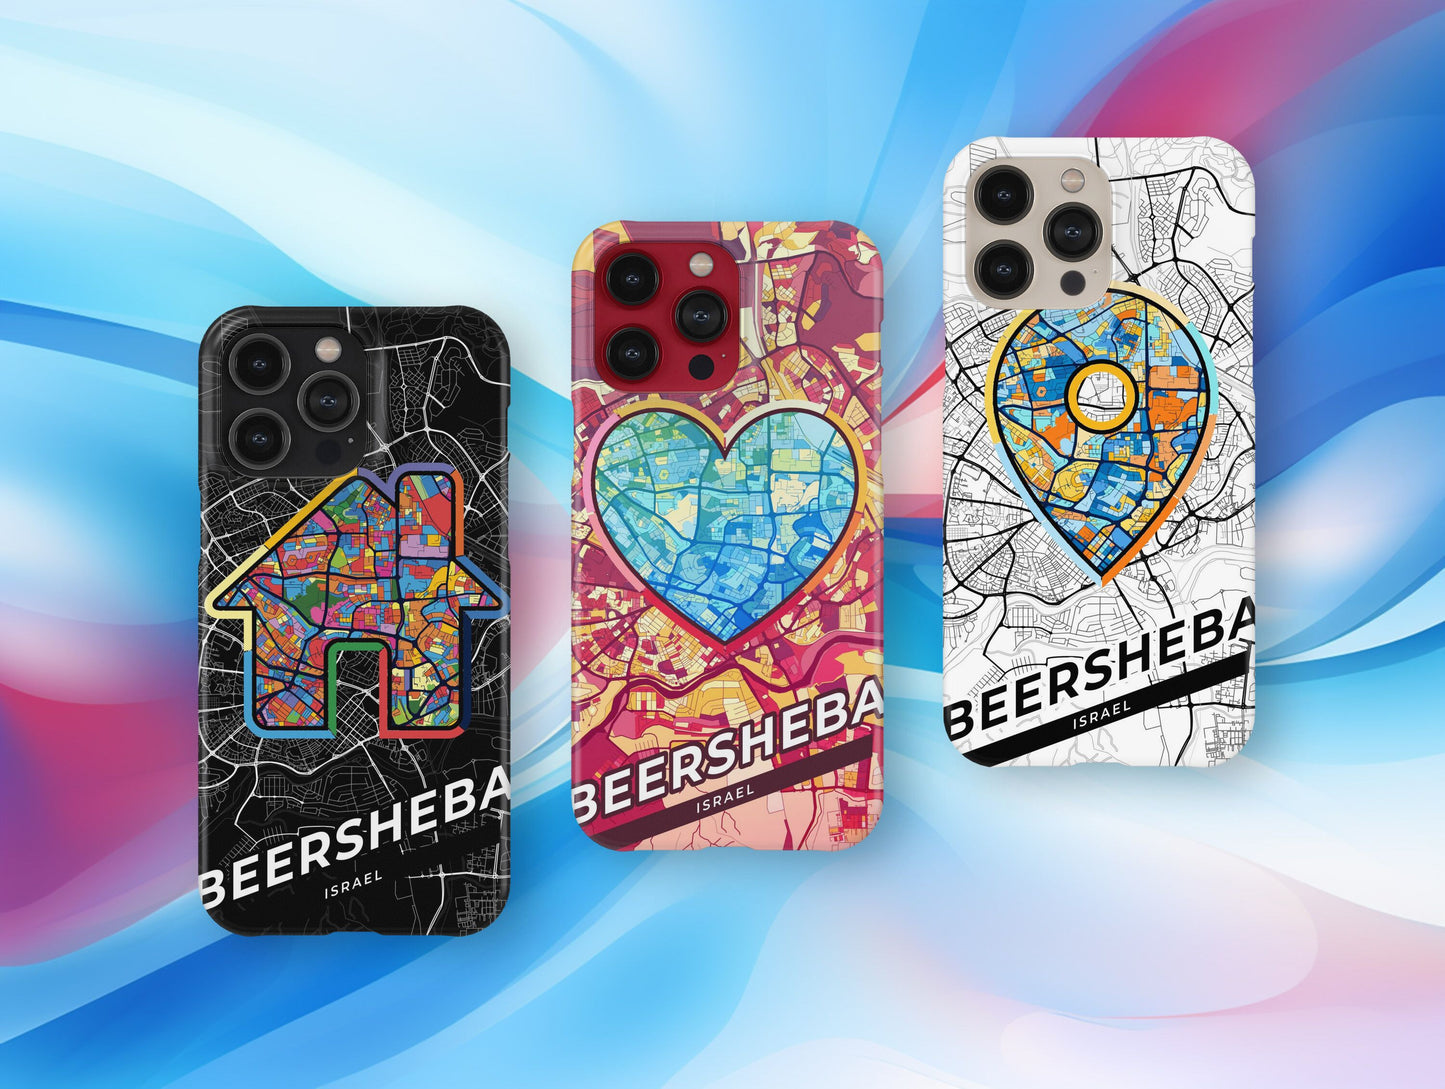 Beersheba Israel slim phone case with colorful icon. Birthday, wedding or housewarming gift. Couple match cases.